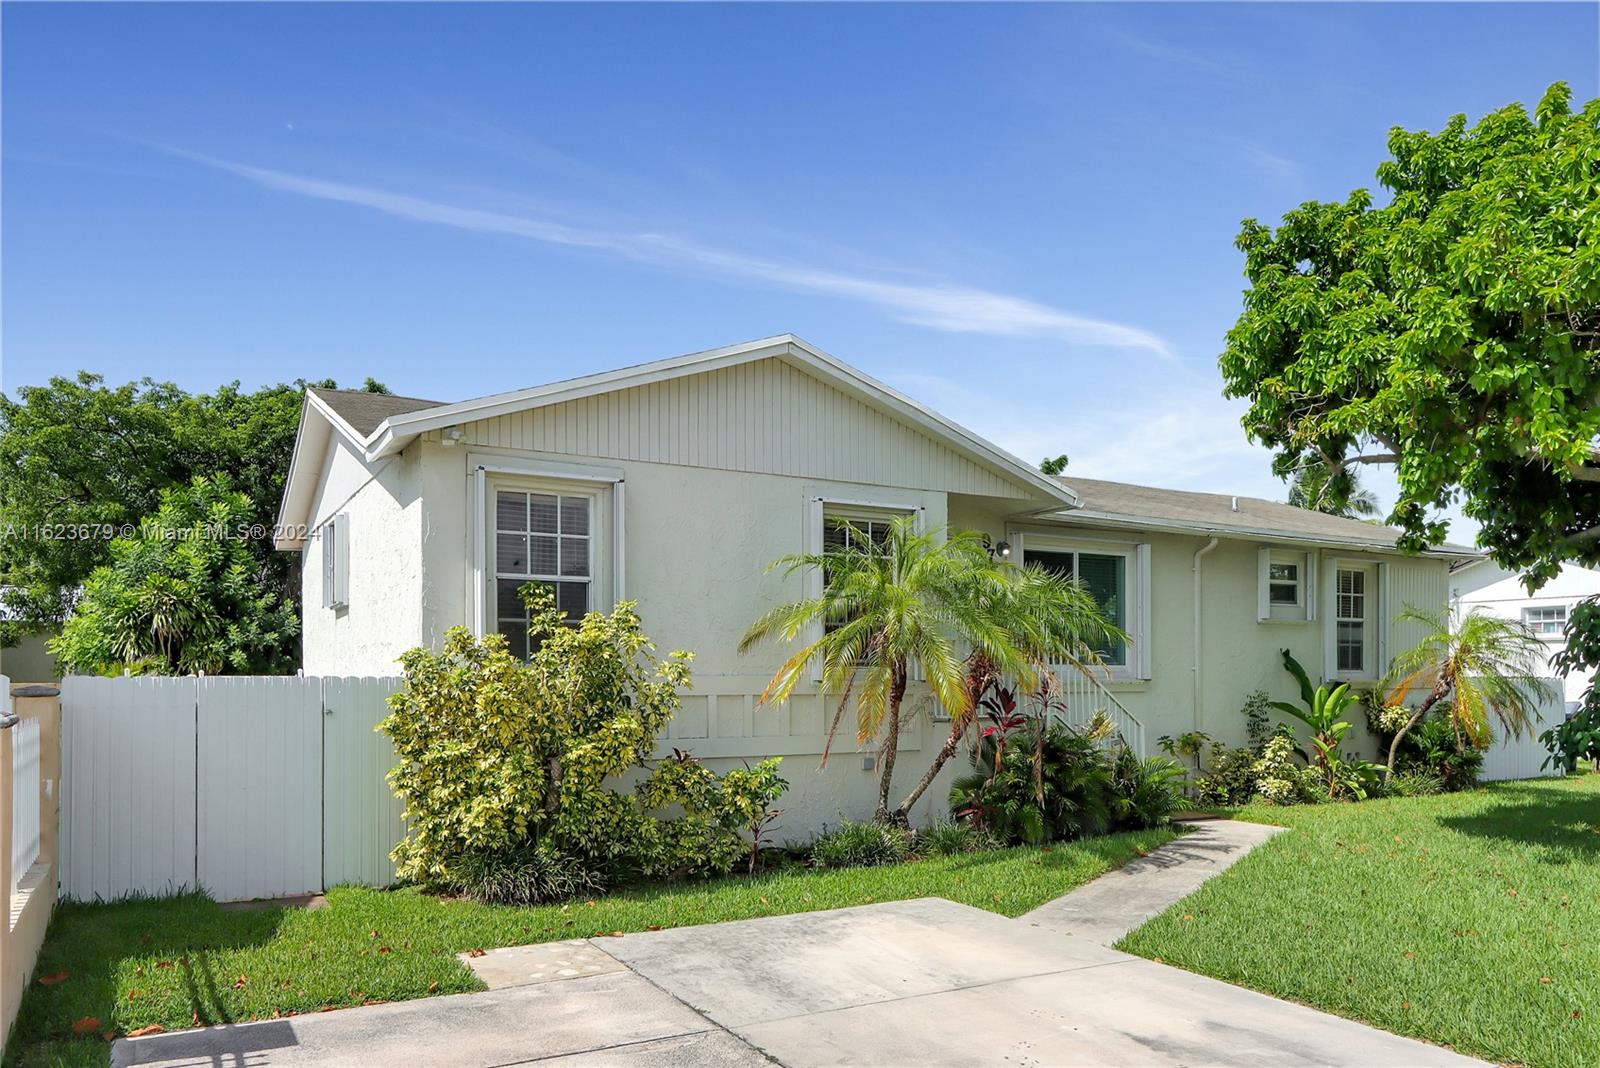 Nestled in the heart of Cutler Bay this home offers a perfect blend of comfort and convenience. This spacious 4-bedroom, 2-bathroom home boasts tile flooring throughout, updated kitchen and bathrooms, newer A/C, newer roof, and PVC plumbing.  Step through the inviting wood deck/terrace into a serene backyard oasis adorned with mature fruit trees, and landscaping perfect for relaxation and outdoor gatherings. Home has ample space for a boat or RV caters to outdoor enthusiasts. Located near schools, parks, and dining options, this home offers both tranquility and accessibility in a sought-after neighborhood. Schedule a showing today and envision your future in this charming Cutler Bay residence!